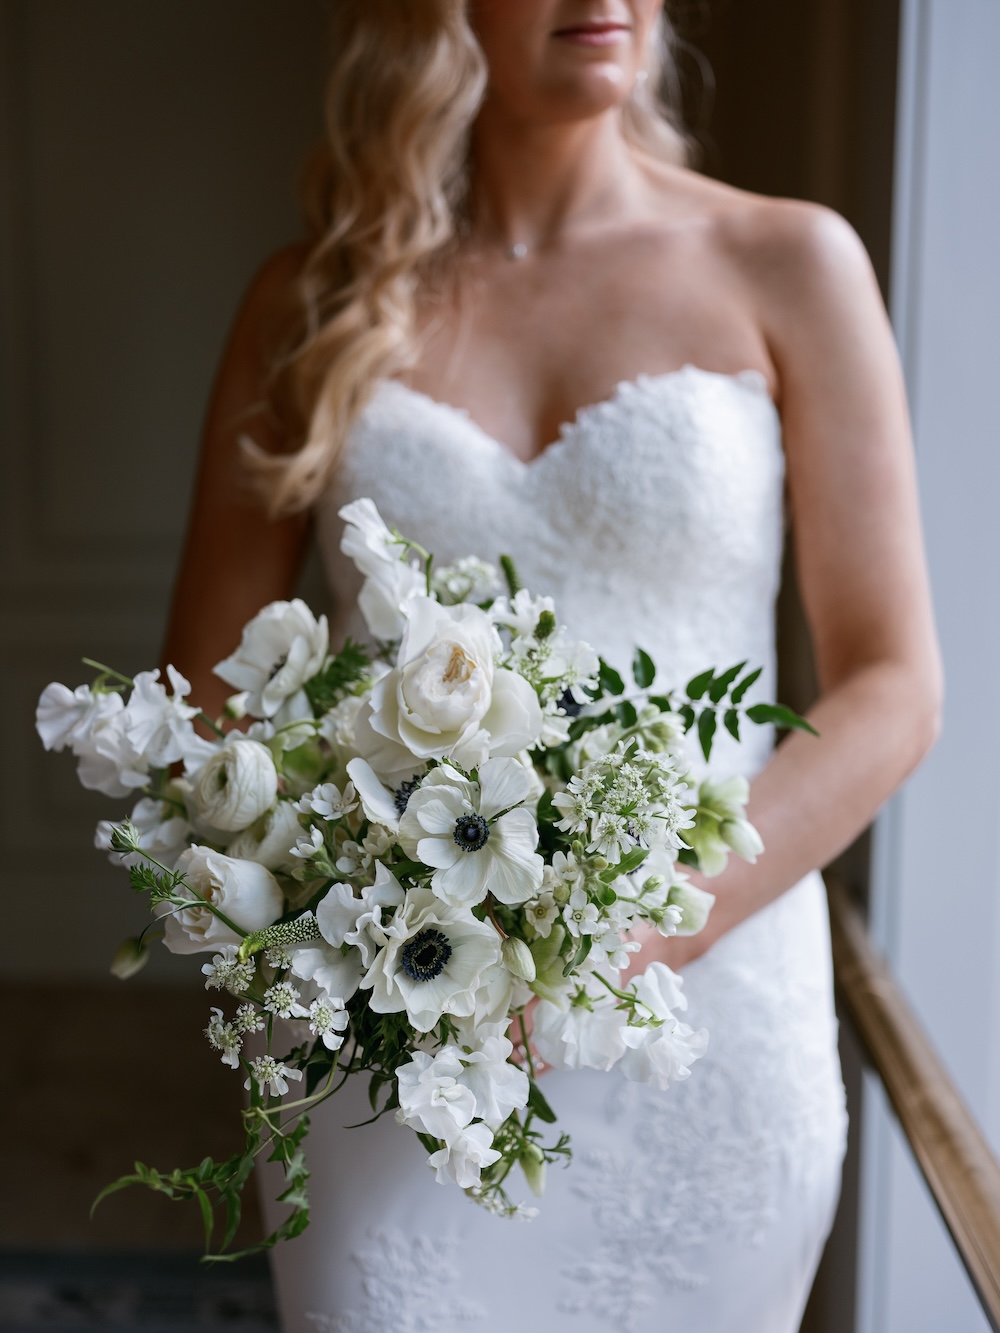 Bride in strapless lace wedding dress holds white and green bouquet. Modern Washington DC wedding at National Museum of Women in the Arts. Sarah Bradshaw Photography.